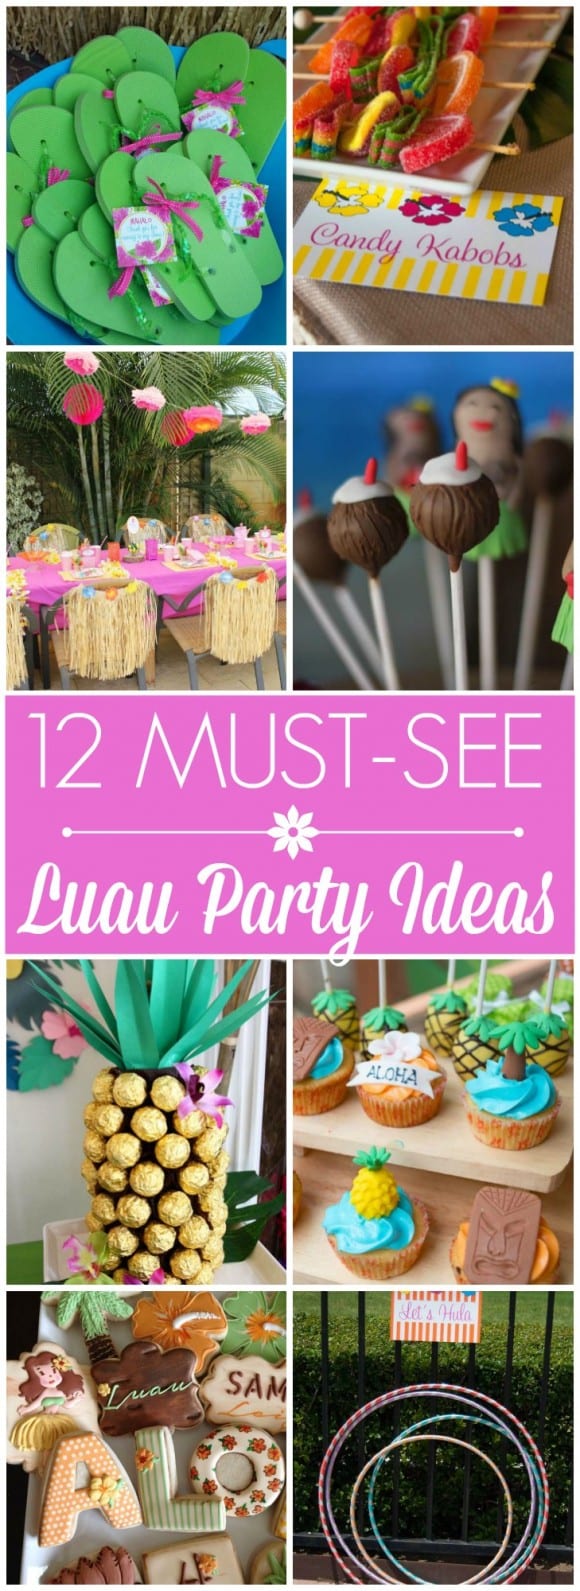 12 Must-See Luau Party Ideas including desserts, decorations, party favors, party activities, and more! | CatchMyParty.com